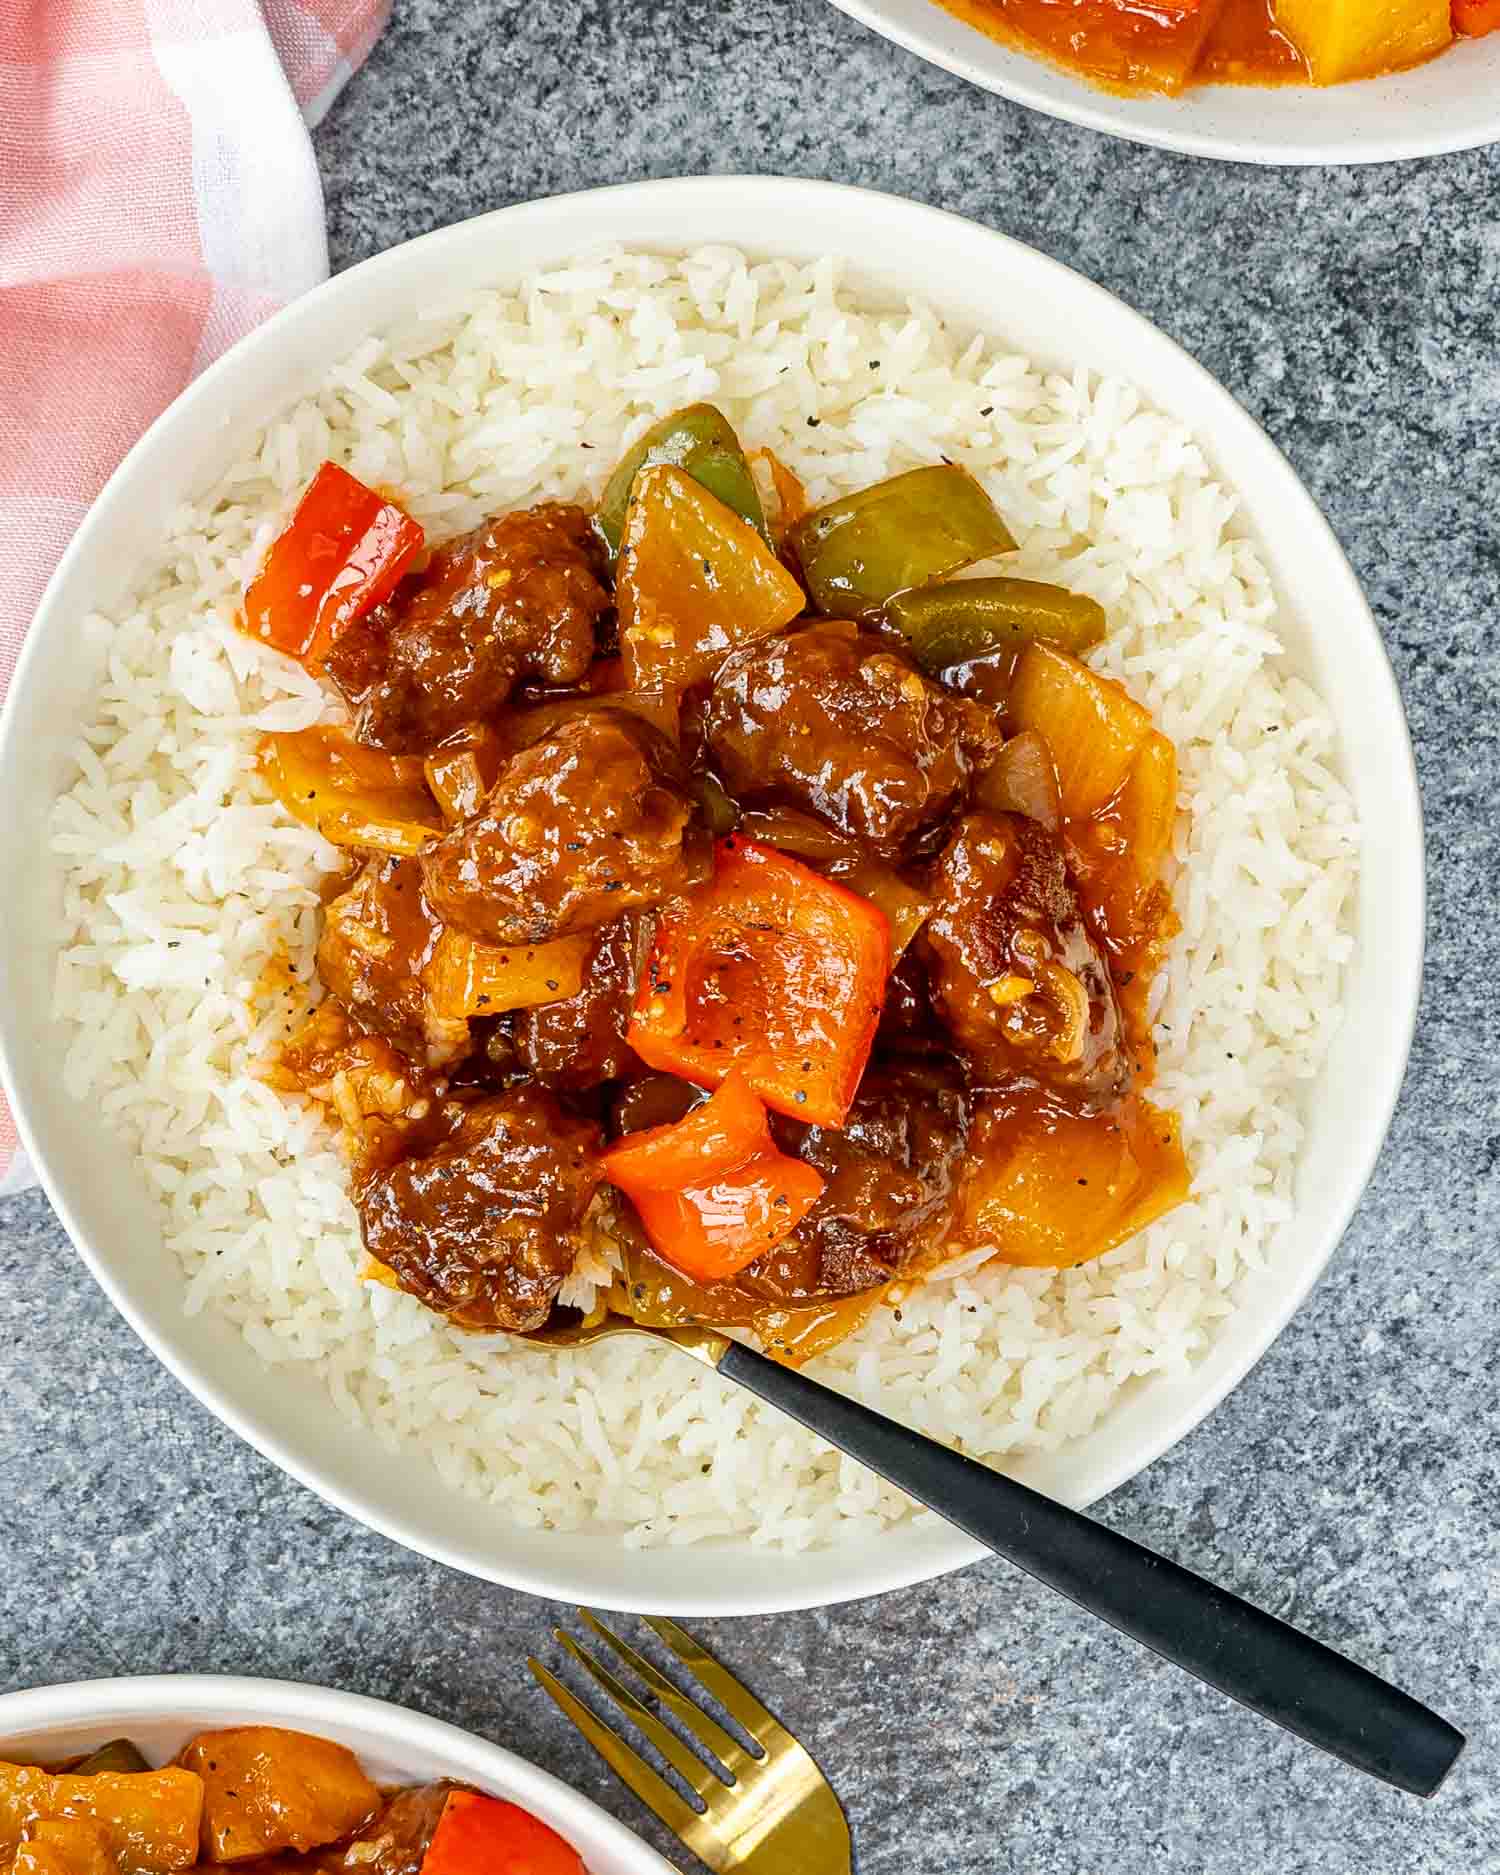 sweet and sour pork on a bed of rice in a white bowl.